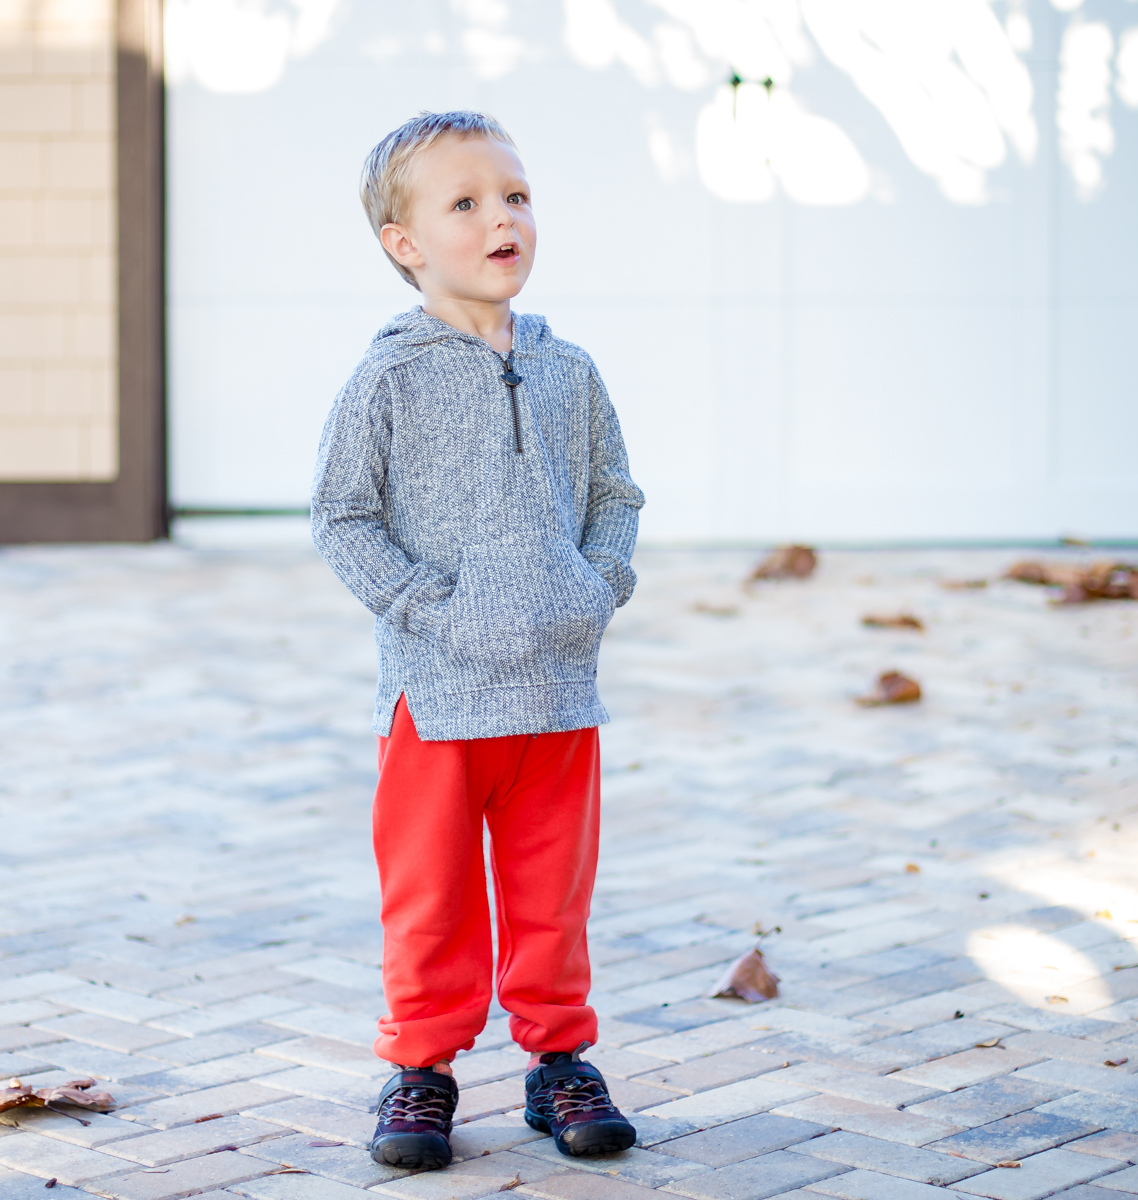 22 Awesome Outfits For Holiday Gatherings For Men, Women, & Children This Winter